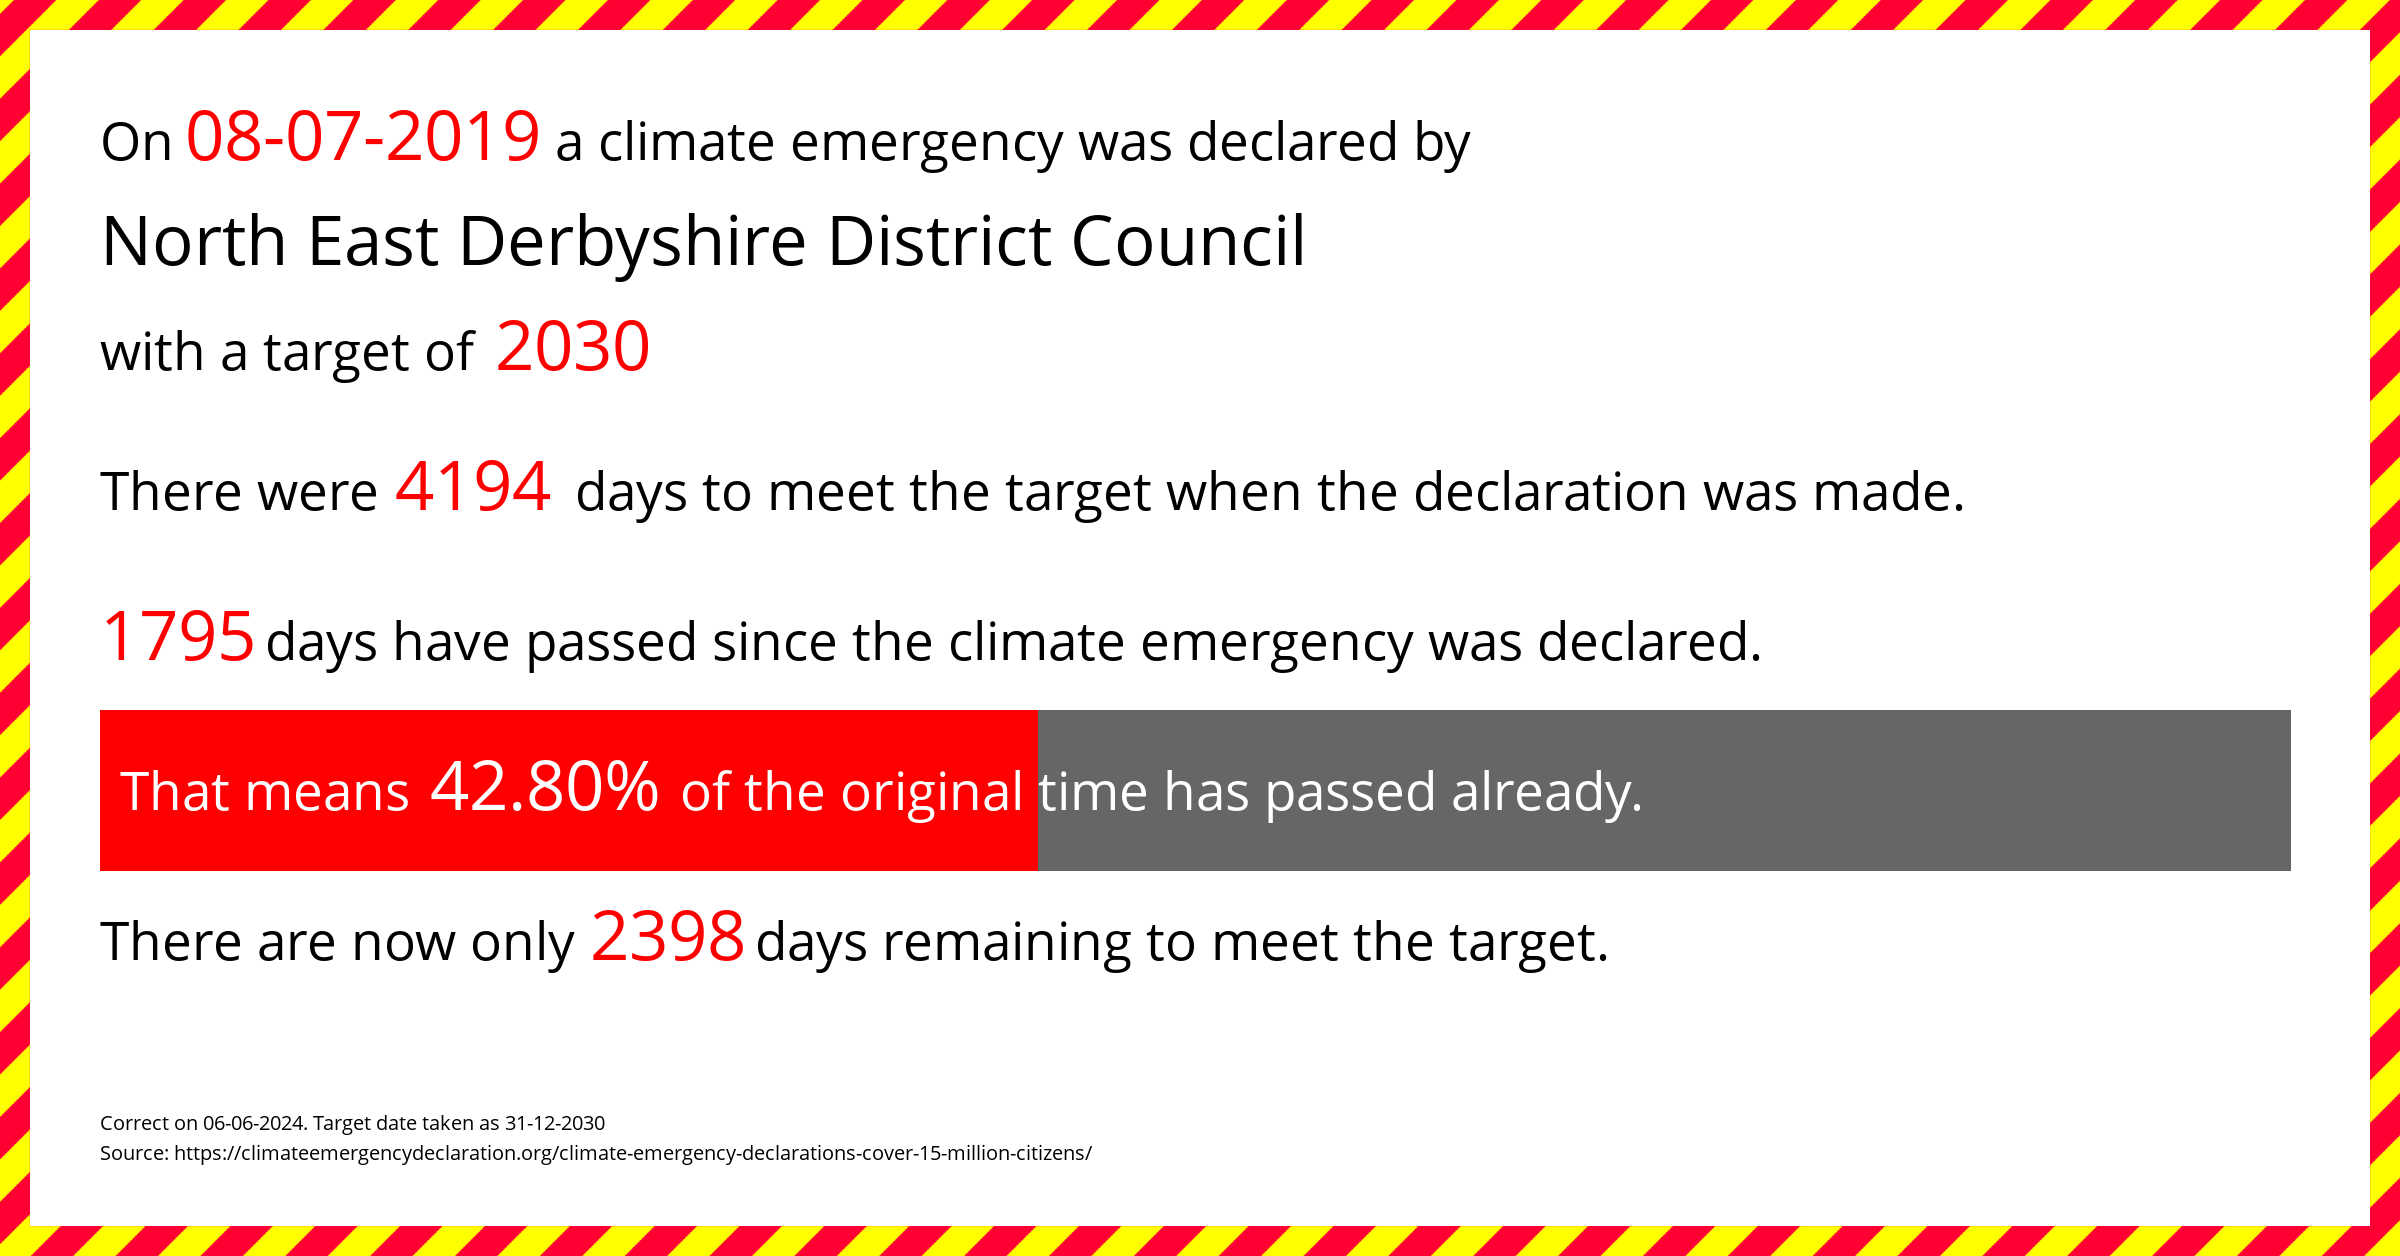 north-east-derbyshire-district-council-climate-emergency